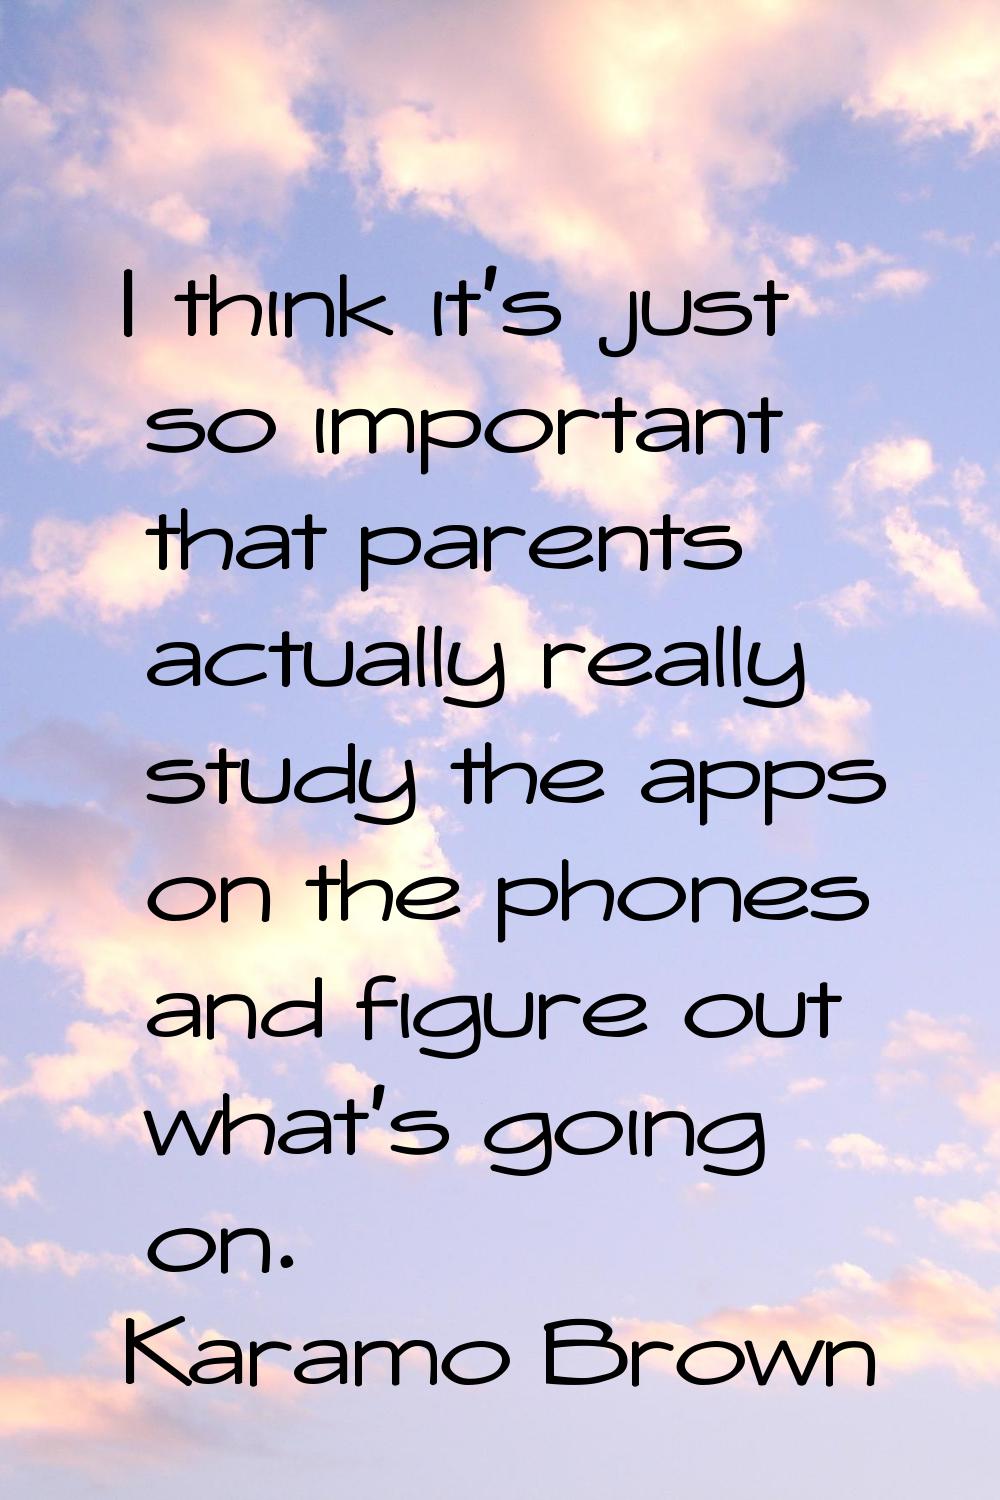 I think it's just so important that parents actually really study the apps on the phones and figure